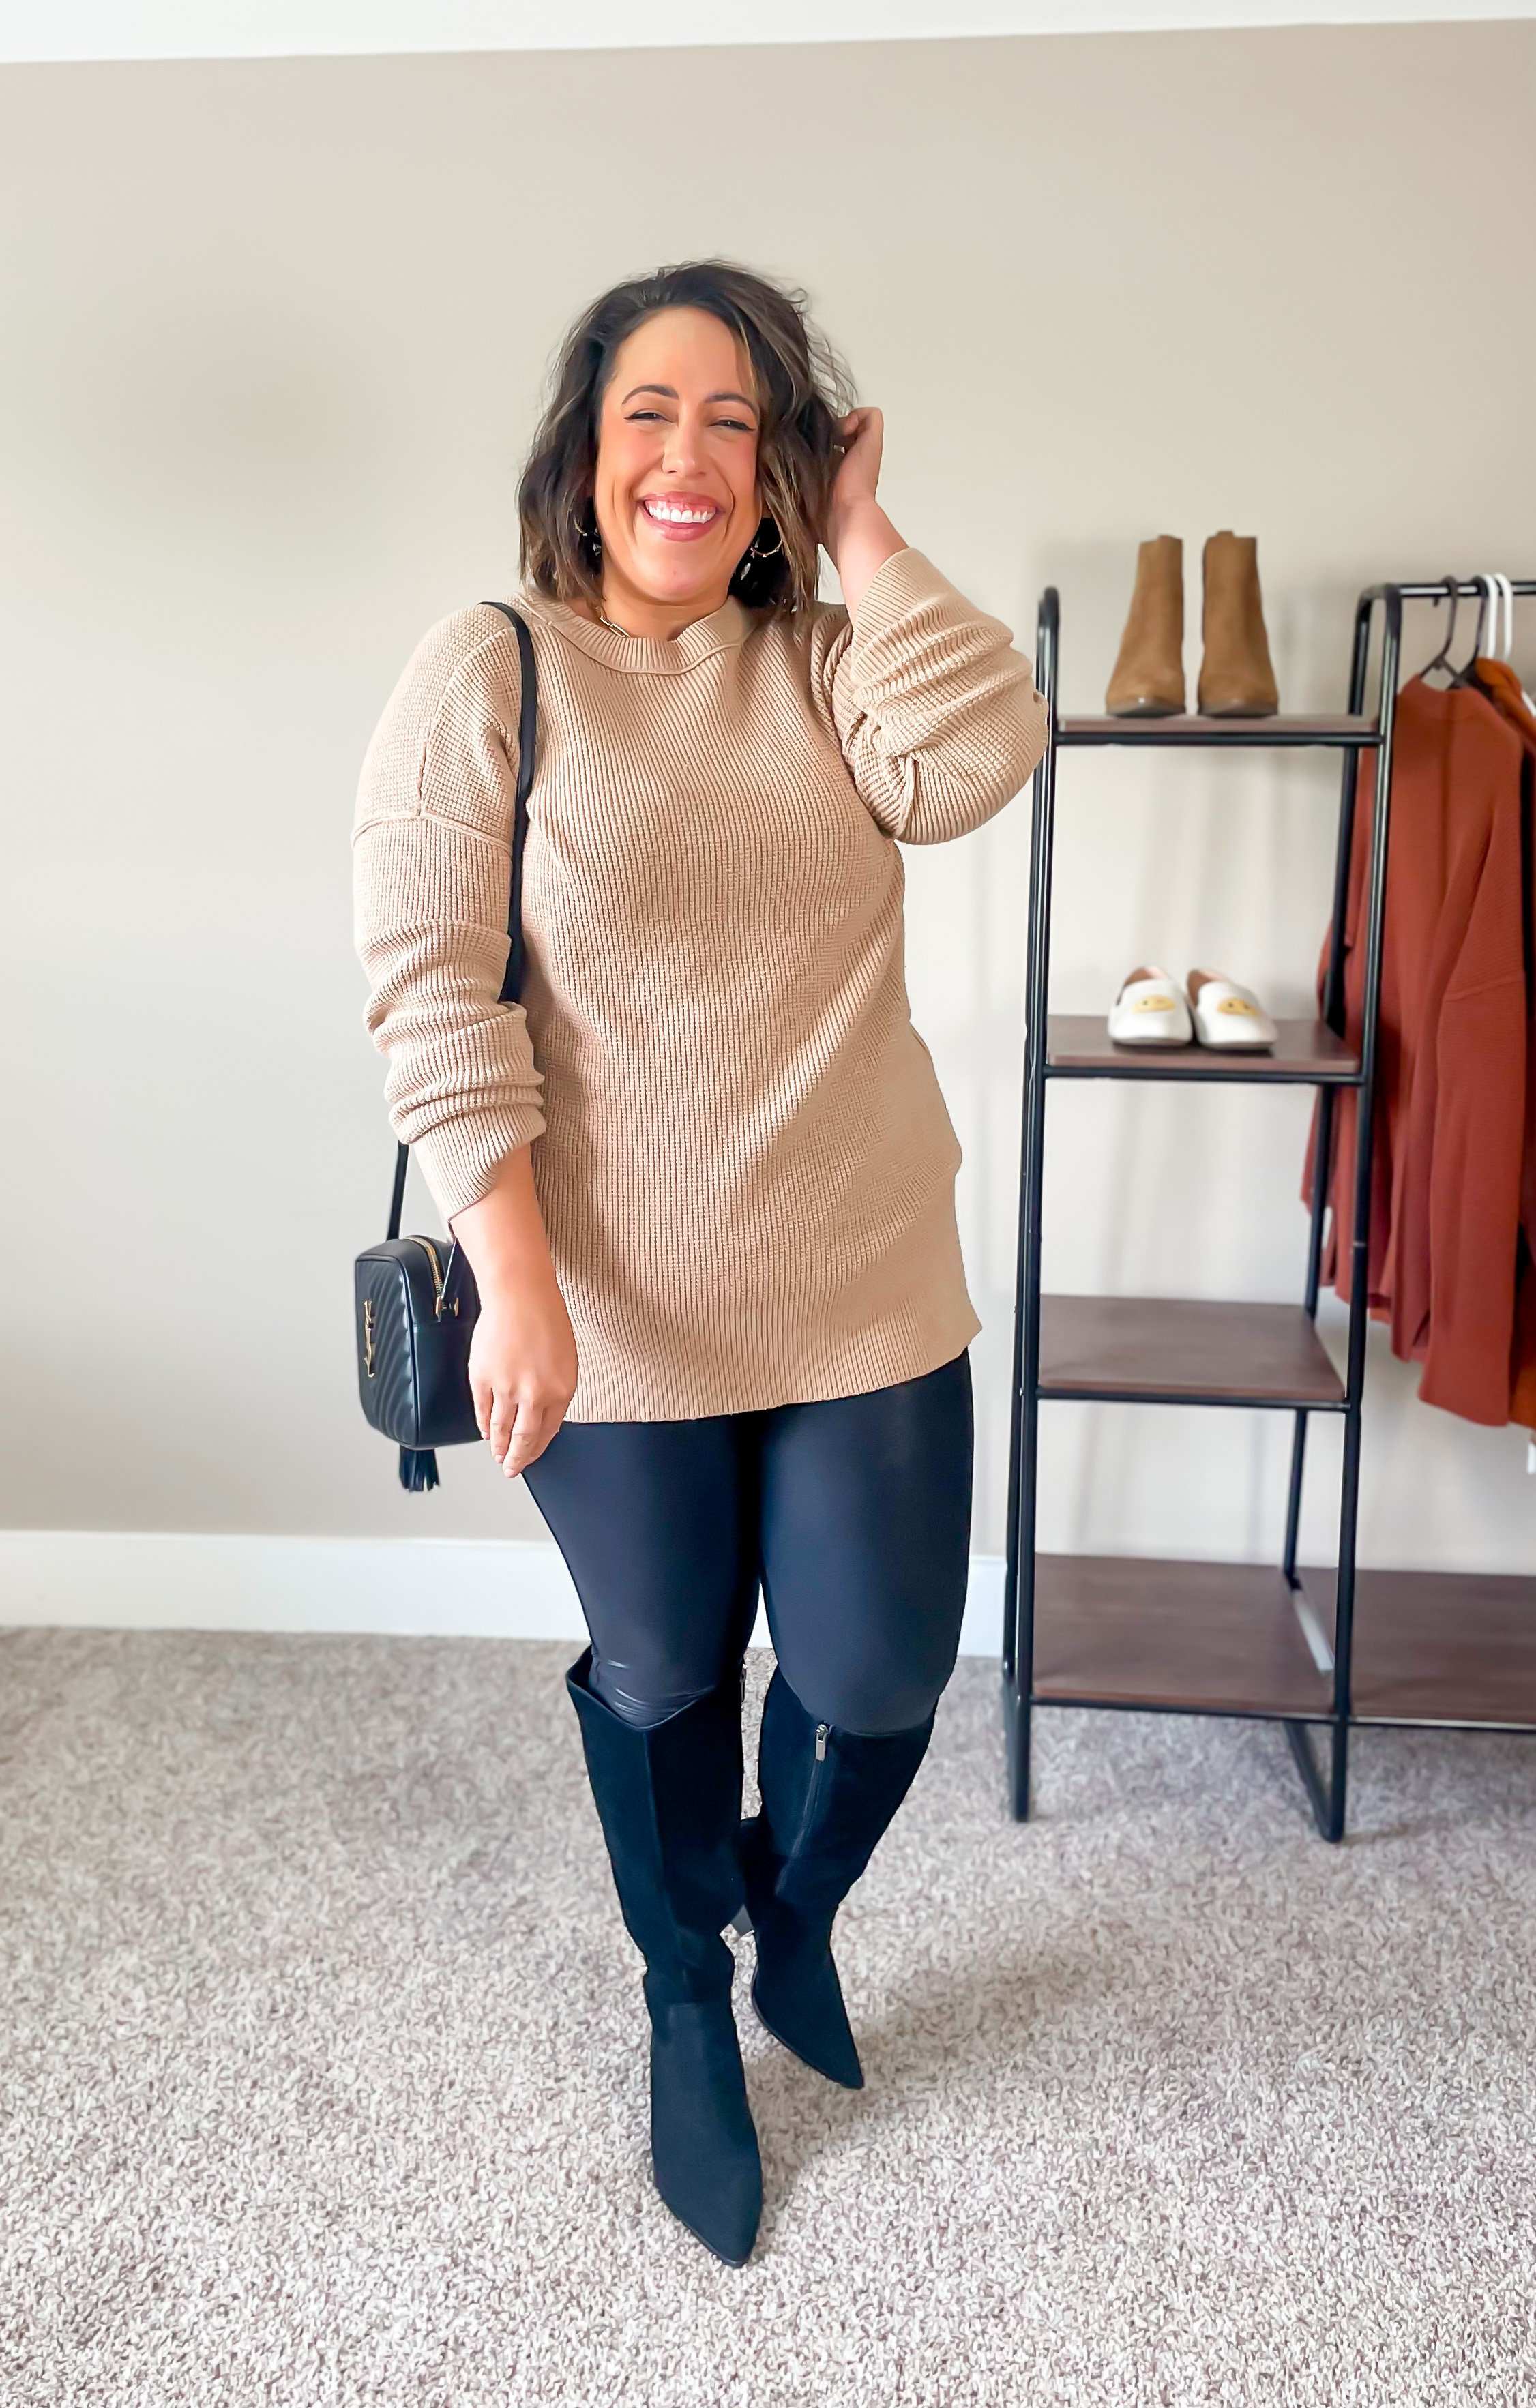 Midsize Outfits for Fall: Knee High Boots